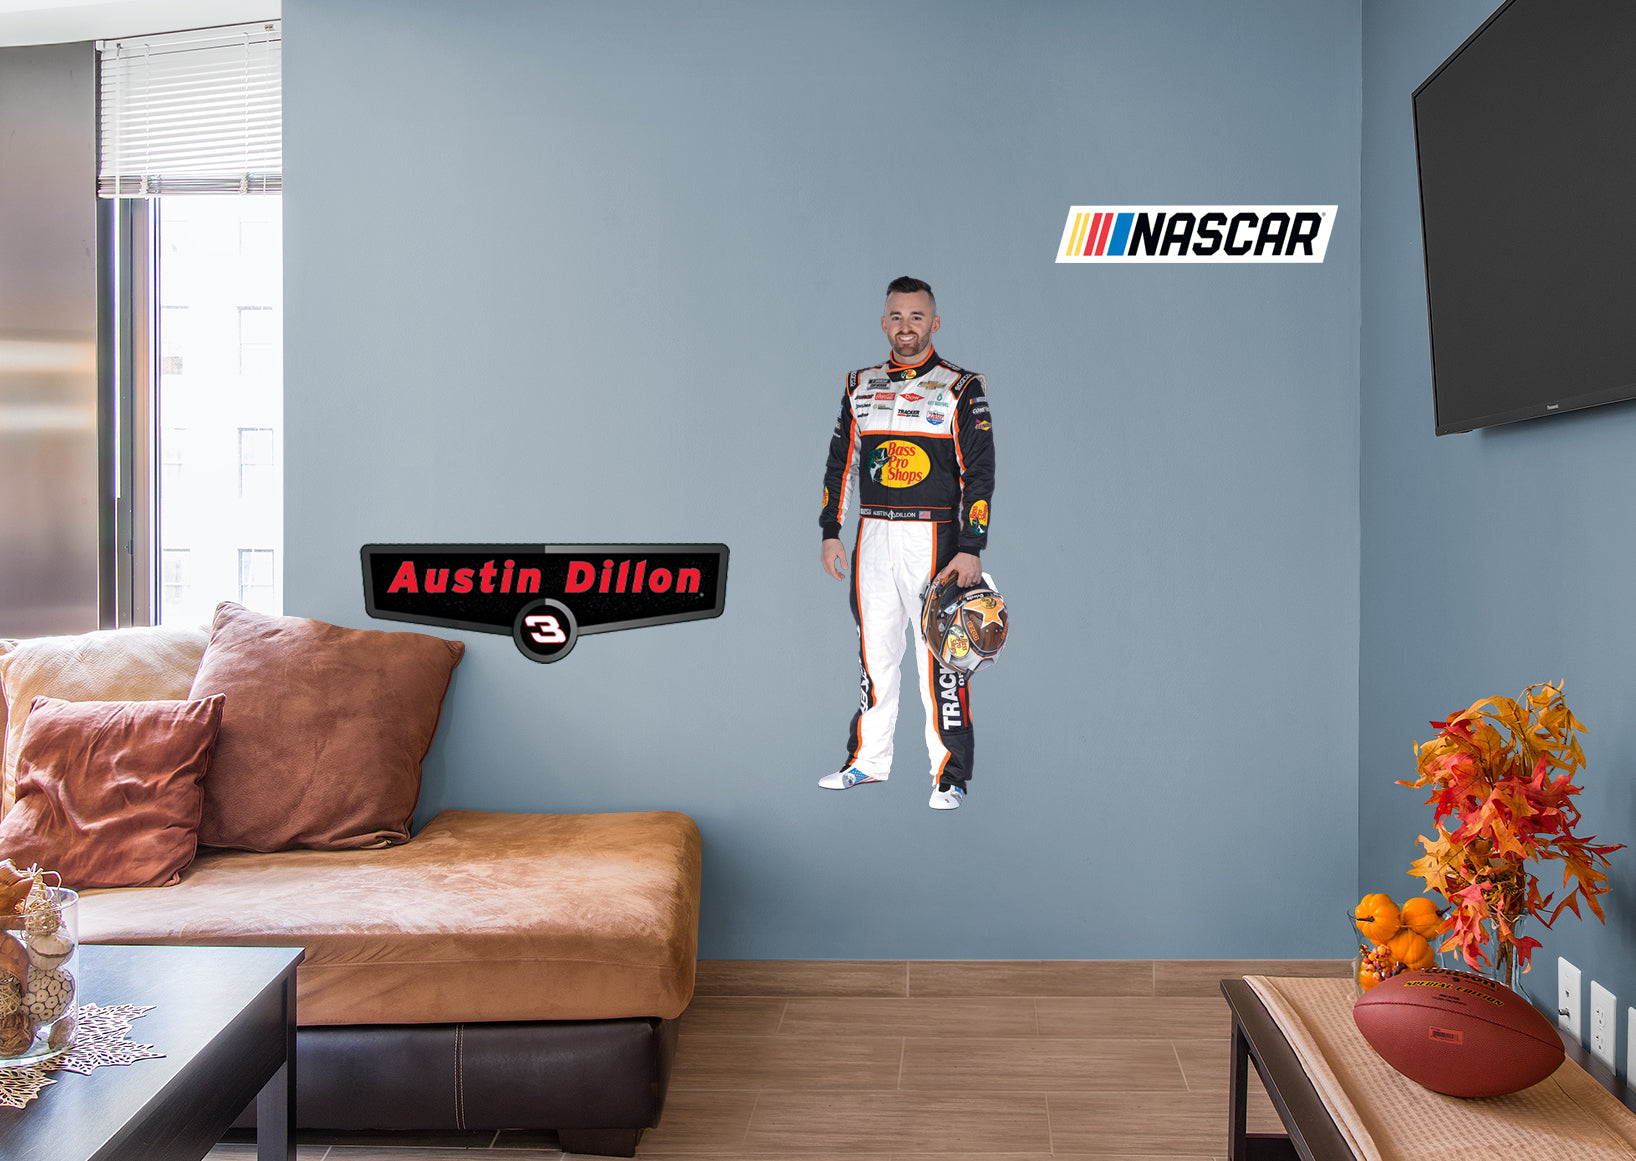 Austin Dillon 2021 Driver - Officially Licensed NASCAR Removable Wall Decal Giant Character + 2 Decals (18"W x 51"H) by Fathead